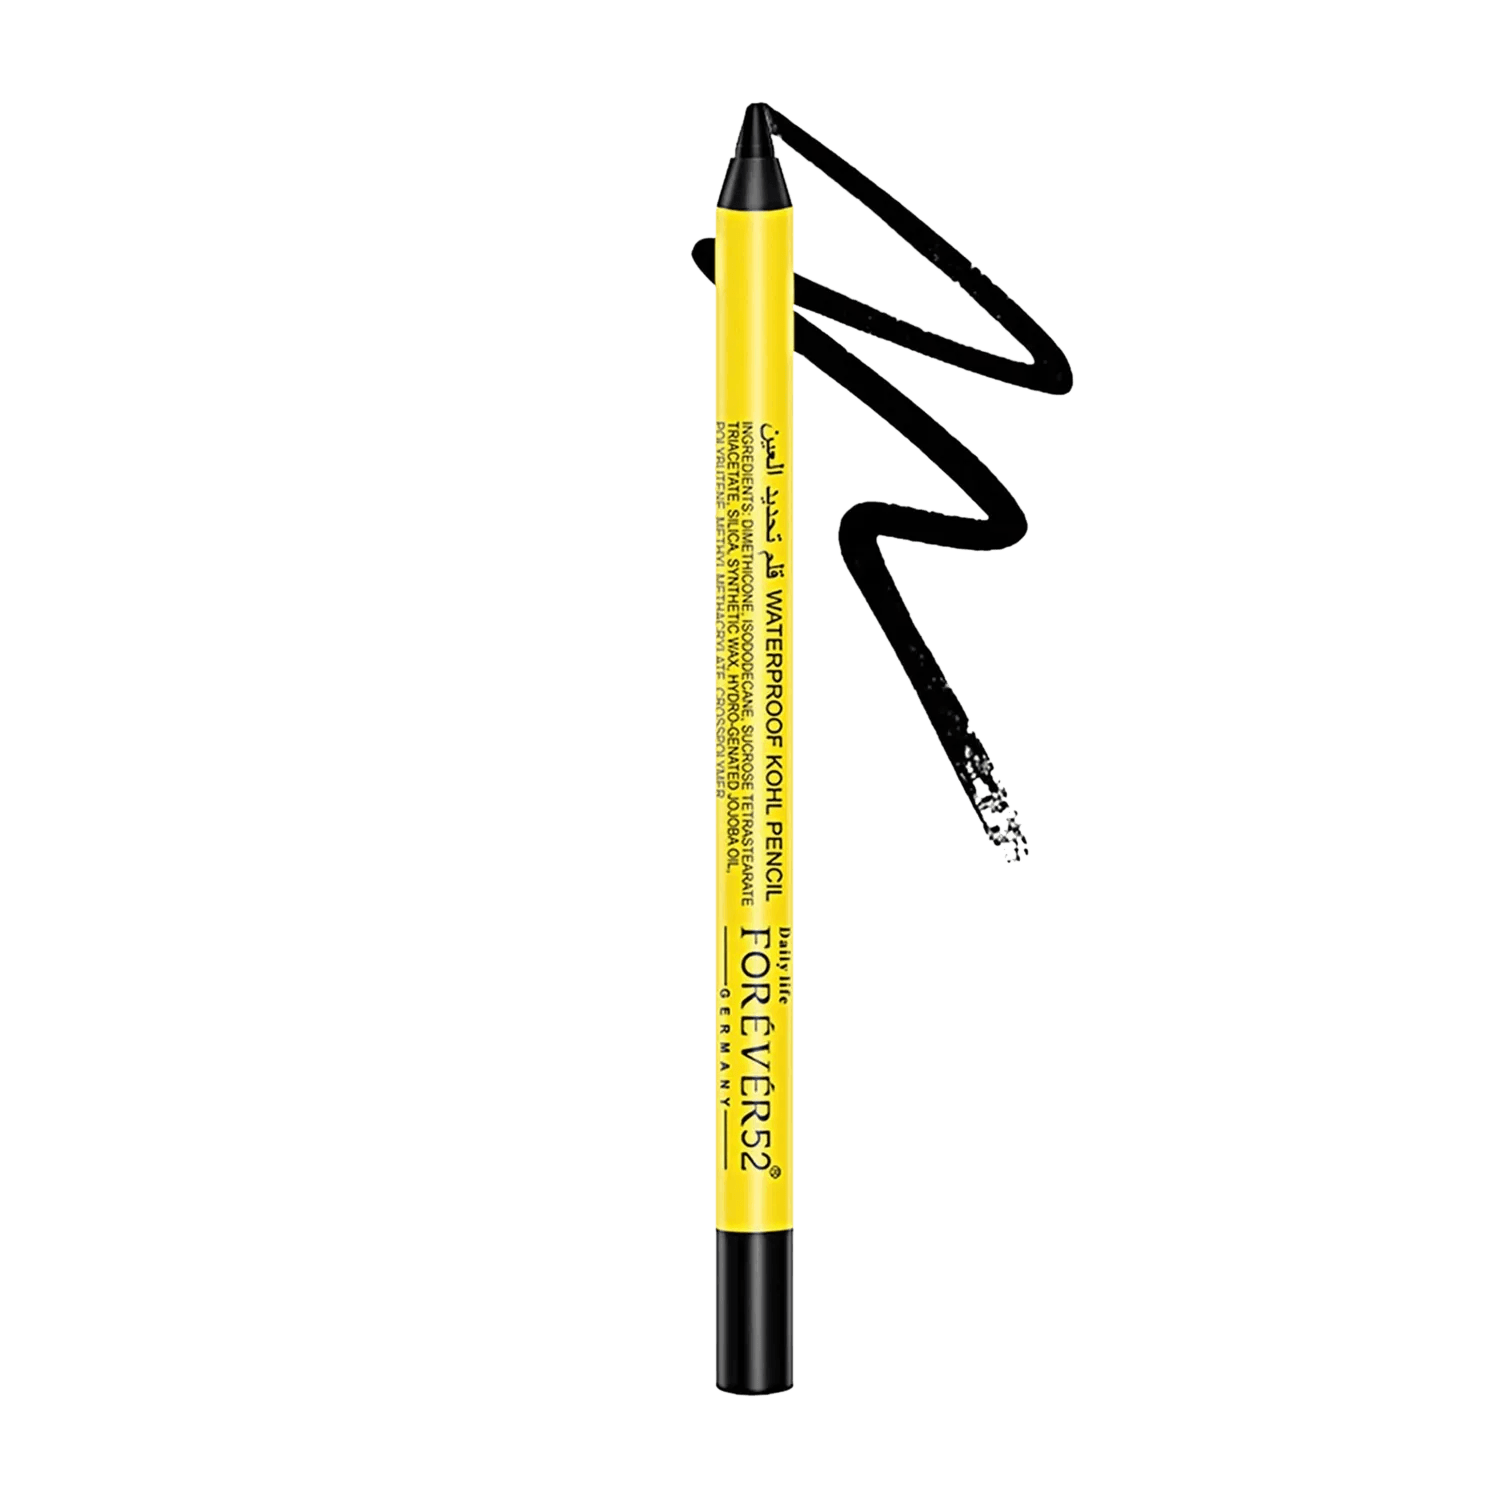 Daily Life Forever52 | Daily Life Forever52 Waterproof Kohl Pencil KWP001 (1gm)